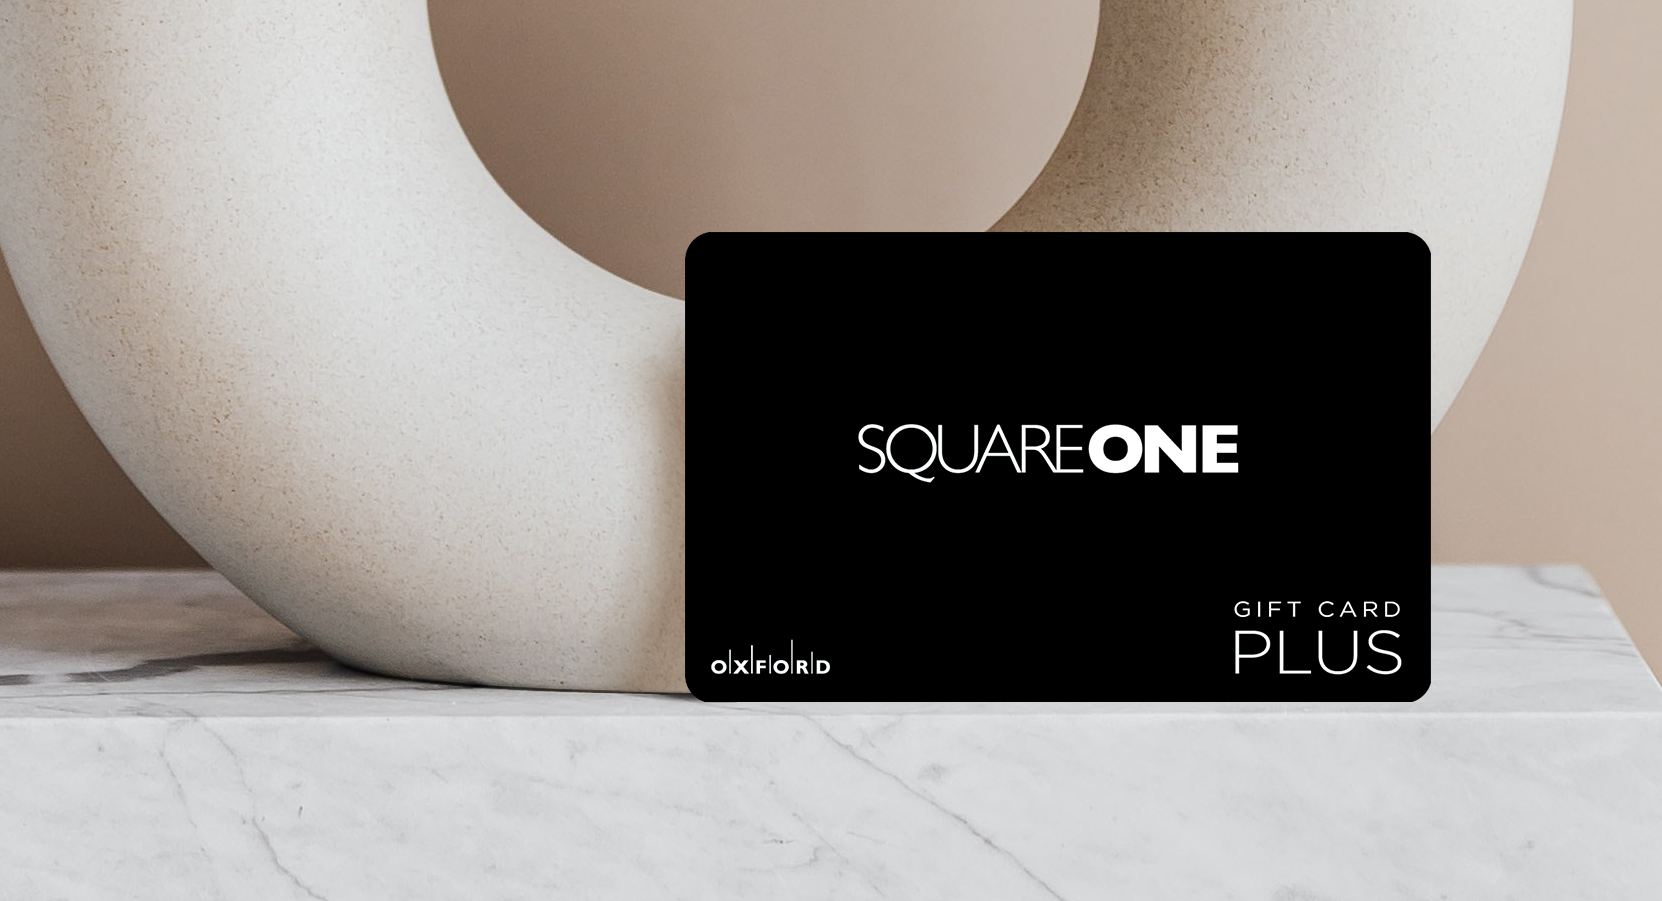 promotional image of a black square one gift card in front of an oval ceramic vase